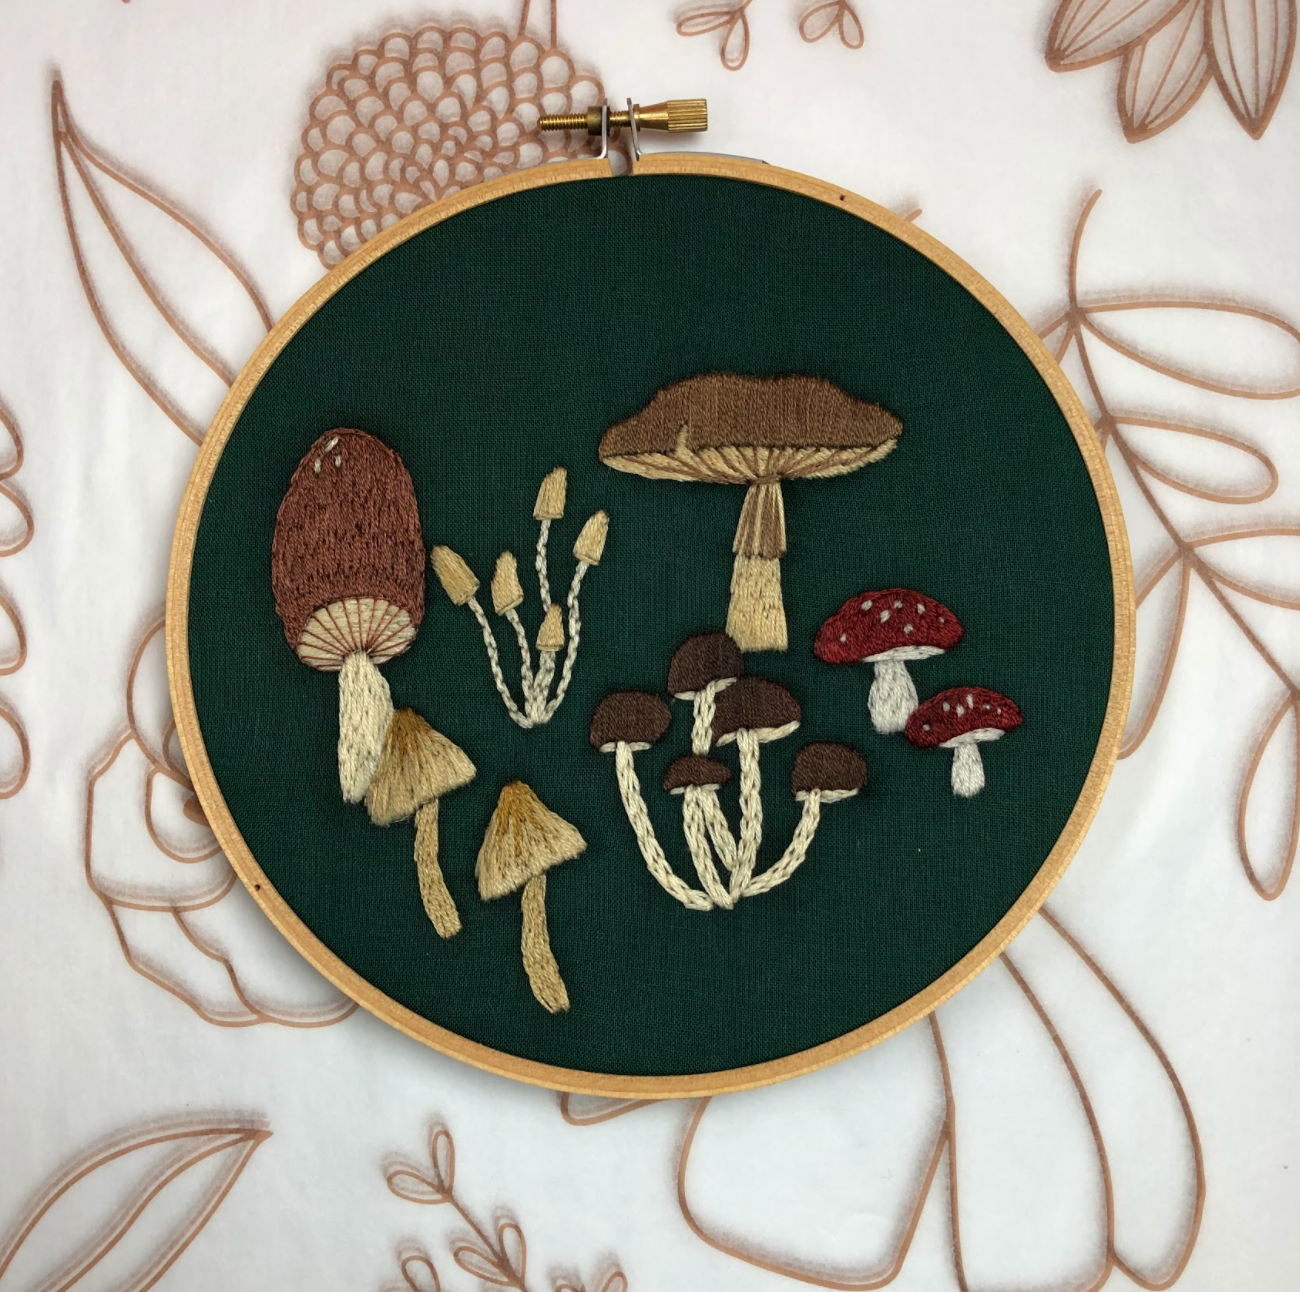 The Top-Rated Mushroom Embroidery Patterns for Each Skill Level